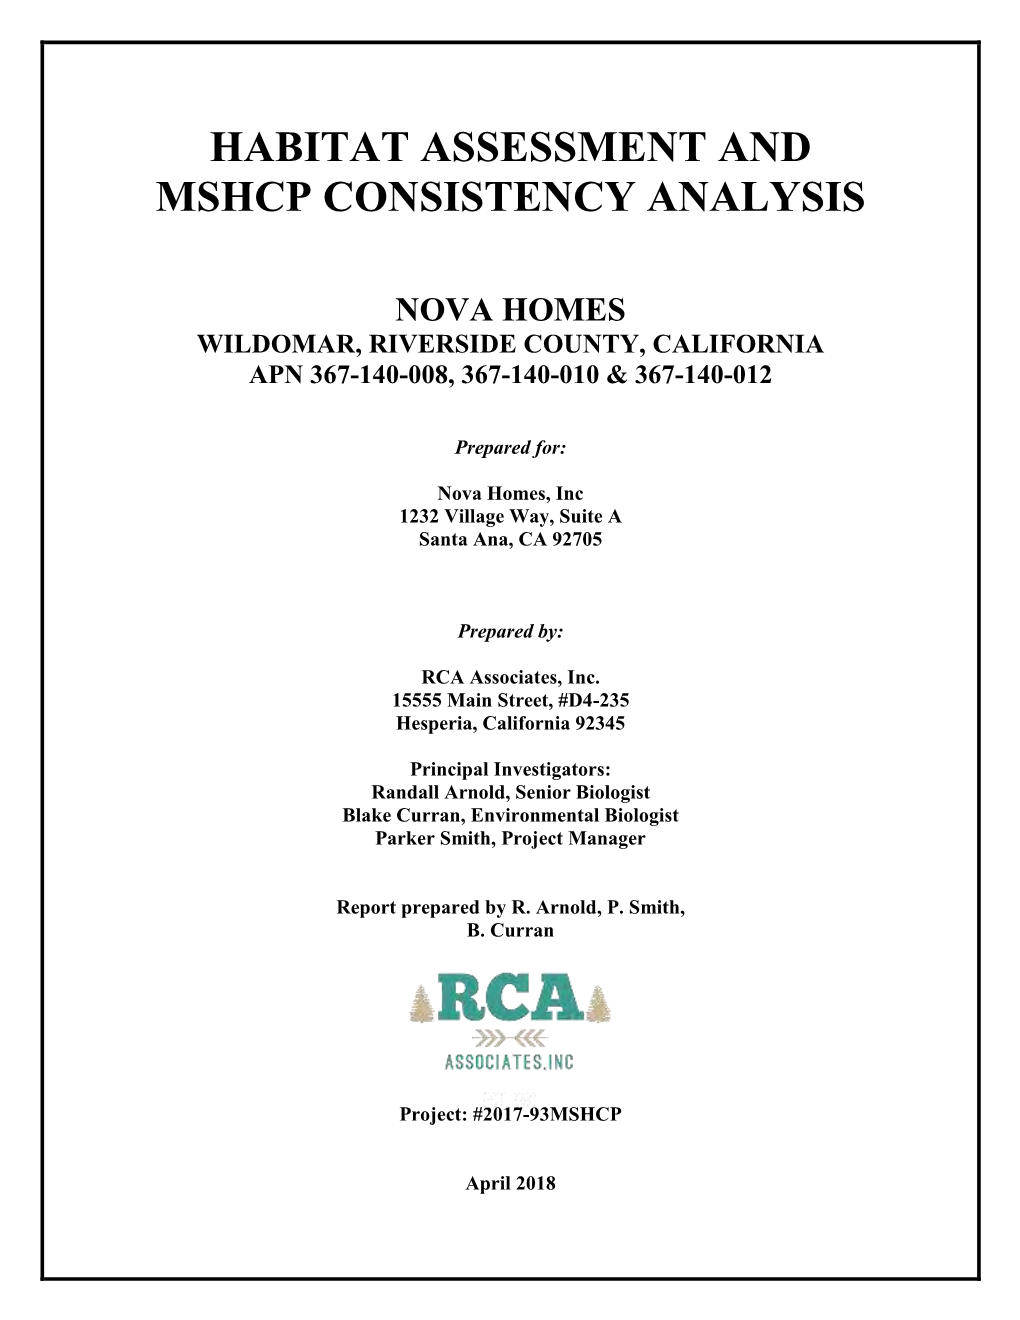 Habitat Assessment and Mshcp Consistency Analysis